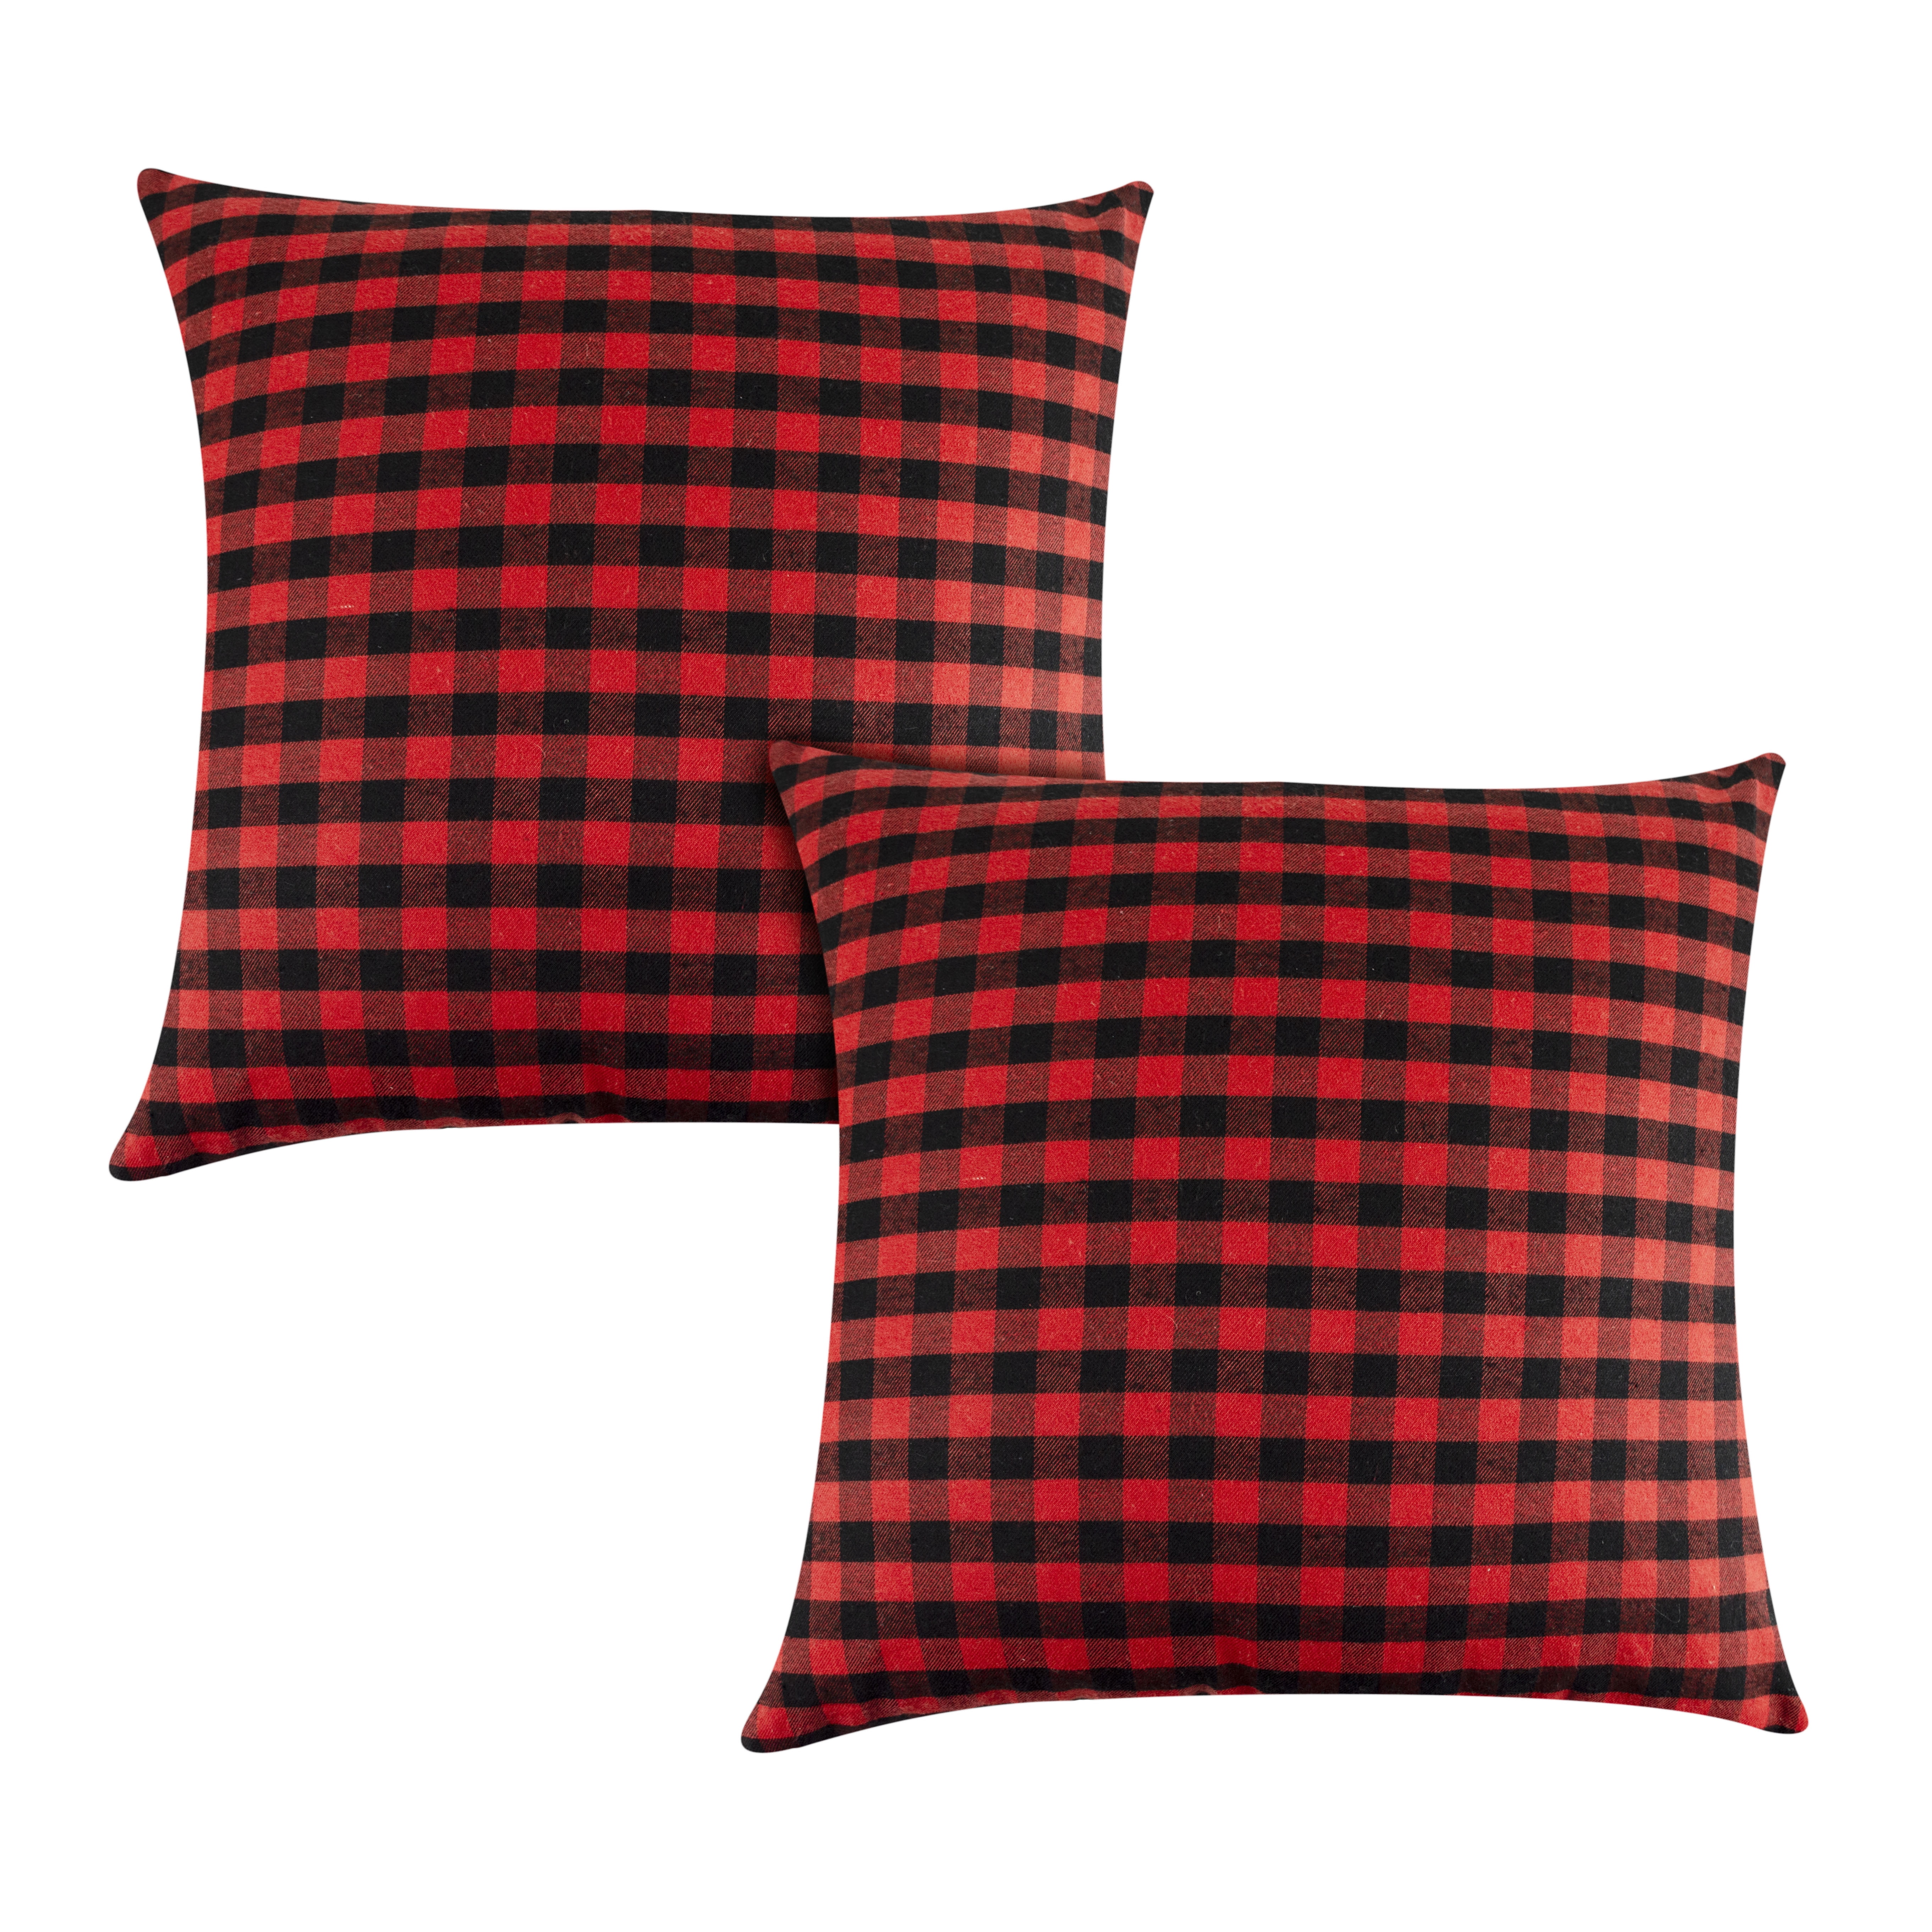 Multicolor Mint Buffalo Plaid Flannel Gingham Personalized Gift Throw Pillow Christmas Buffalo Plaid Deer Colthing 18x18